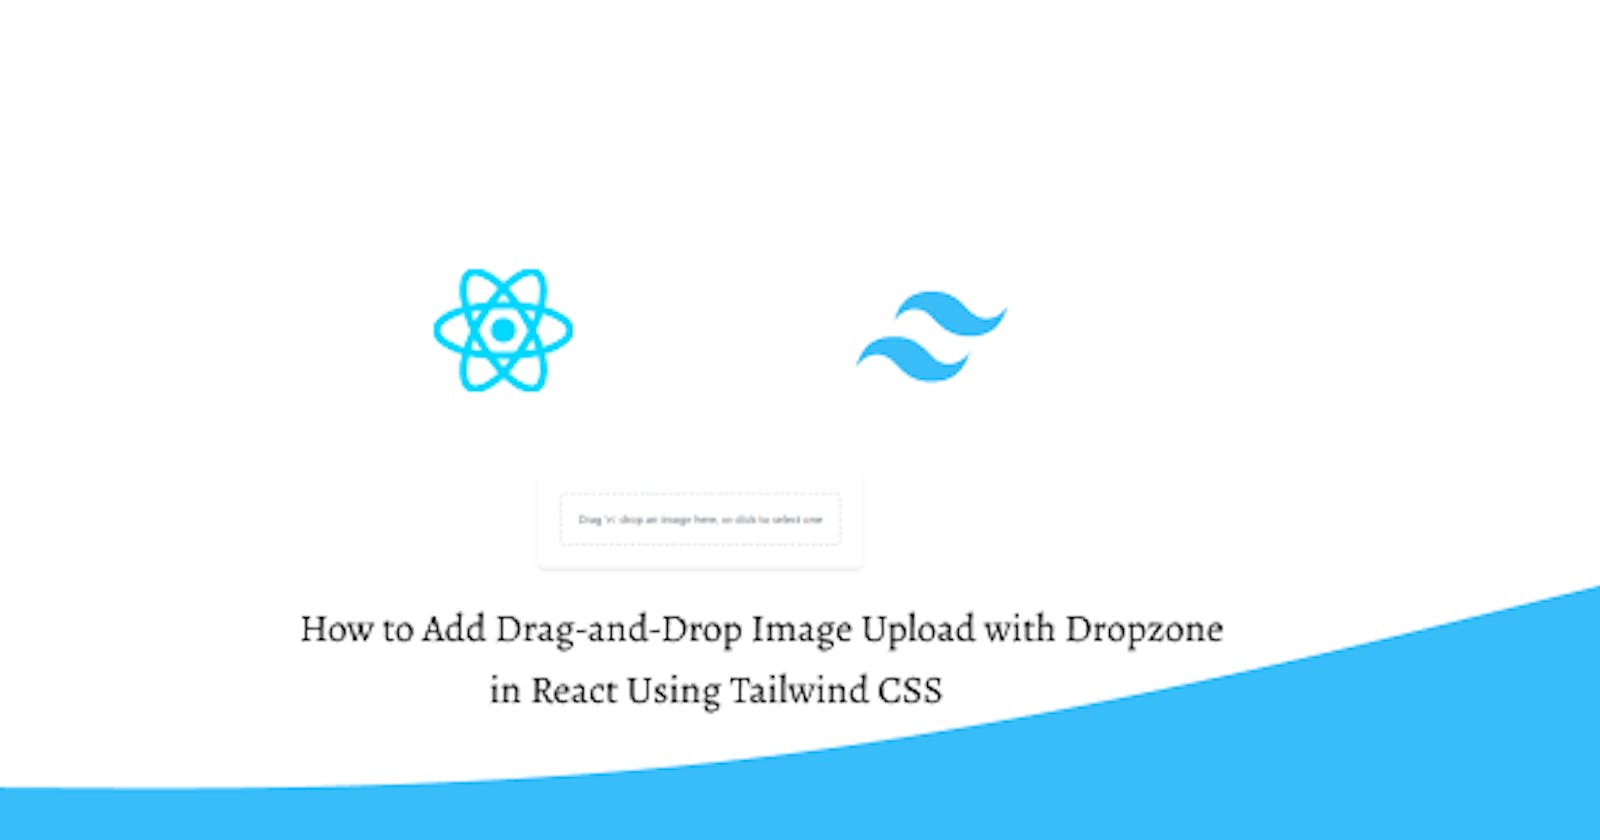 How to Add Drag-and-Drop Image Upload with Dropzone in React Using Tailwind CSS